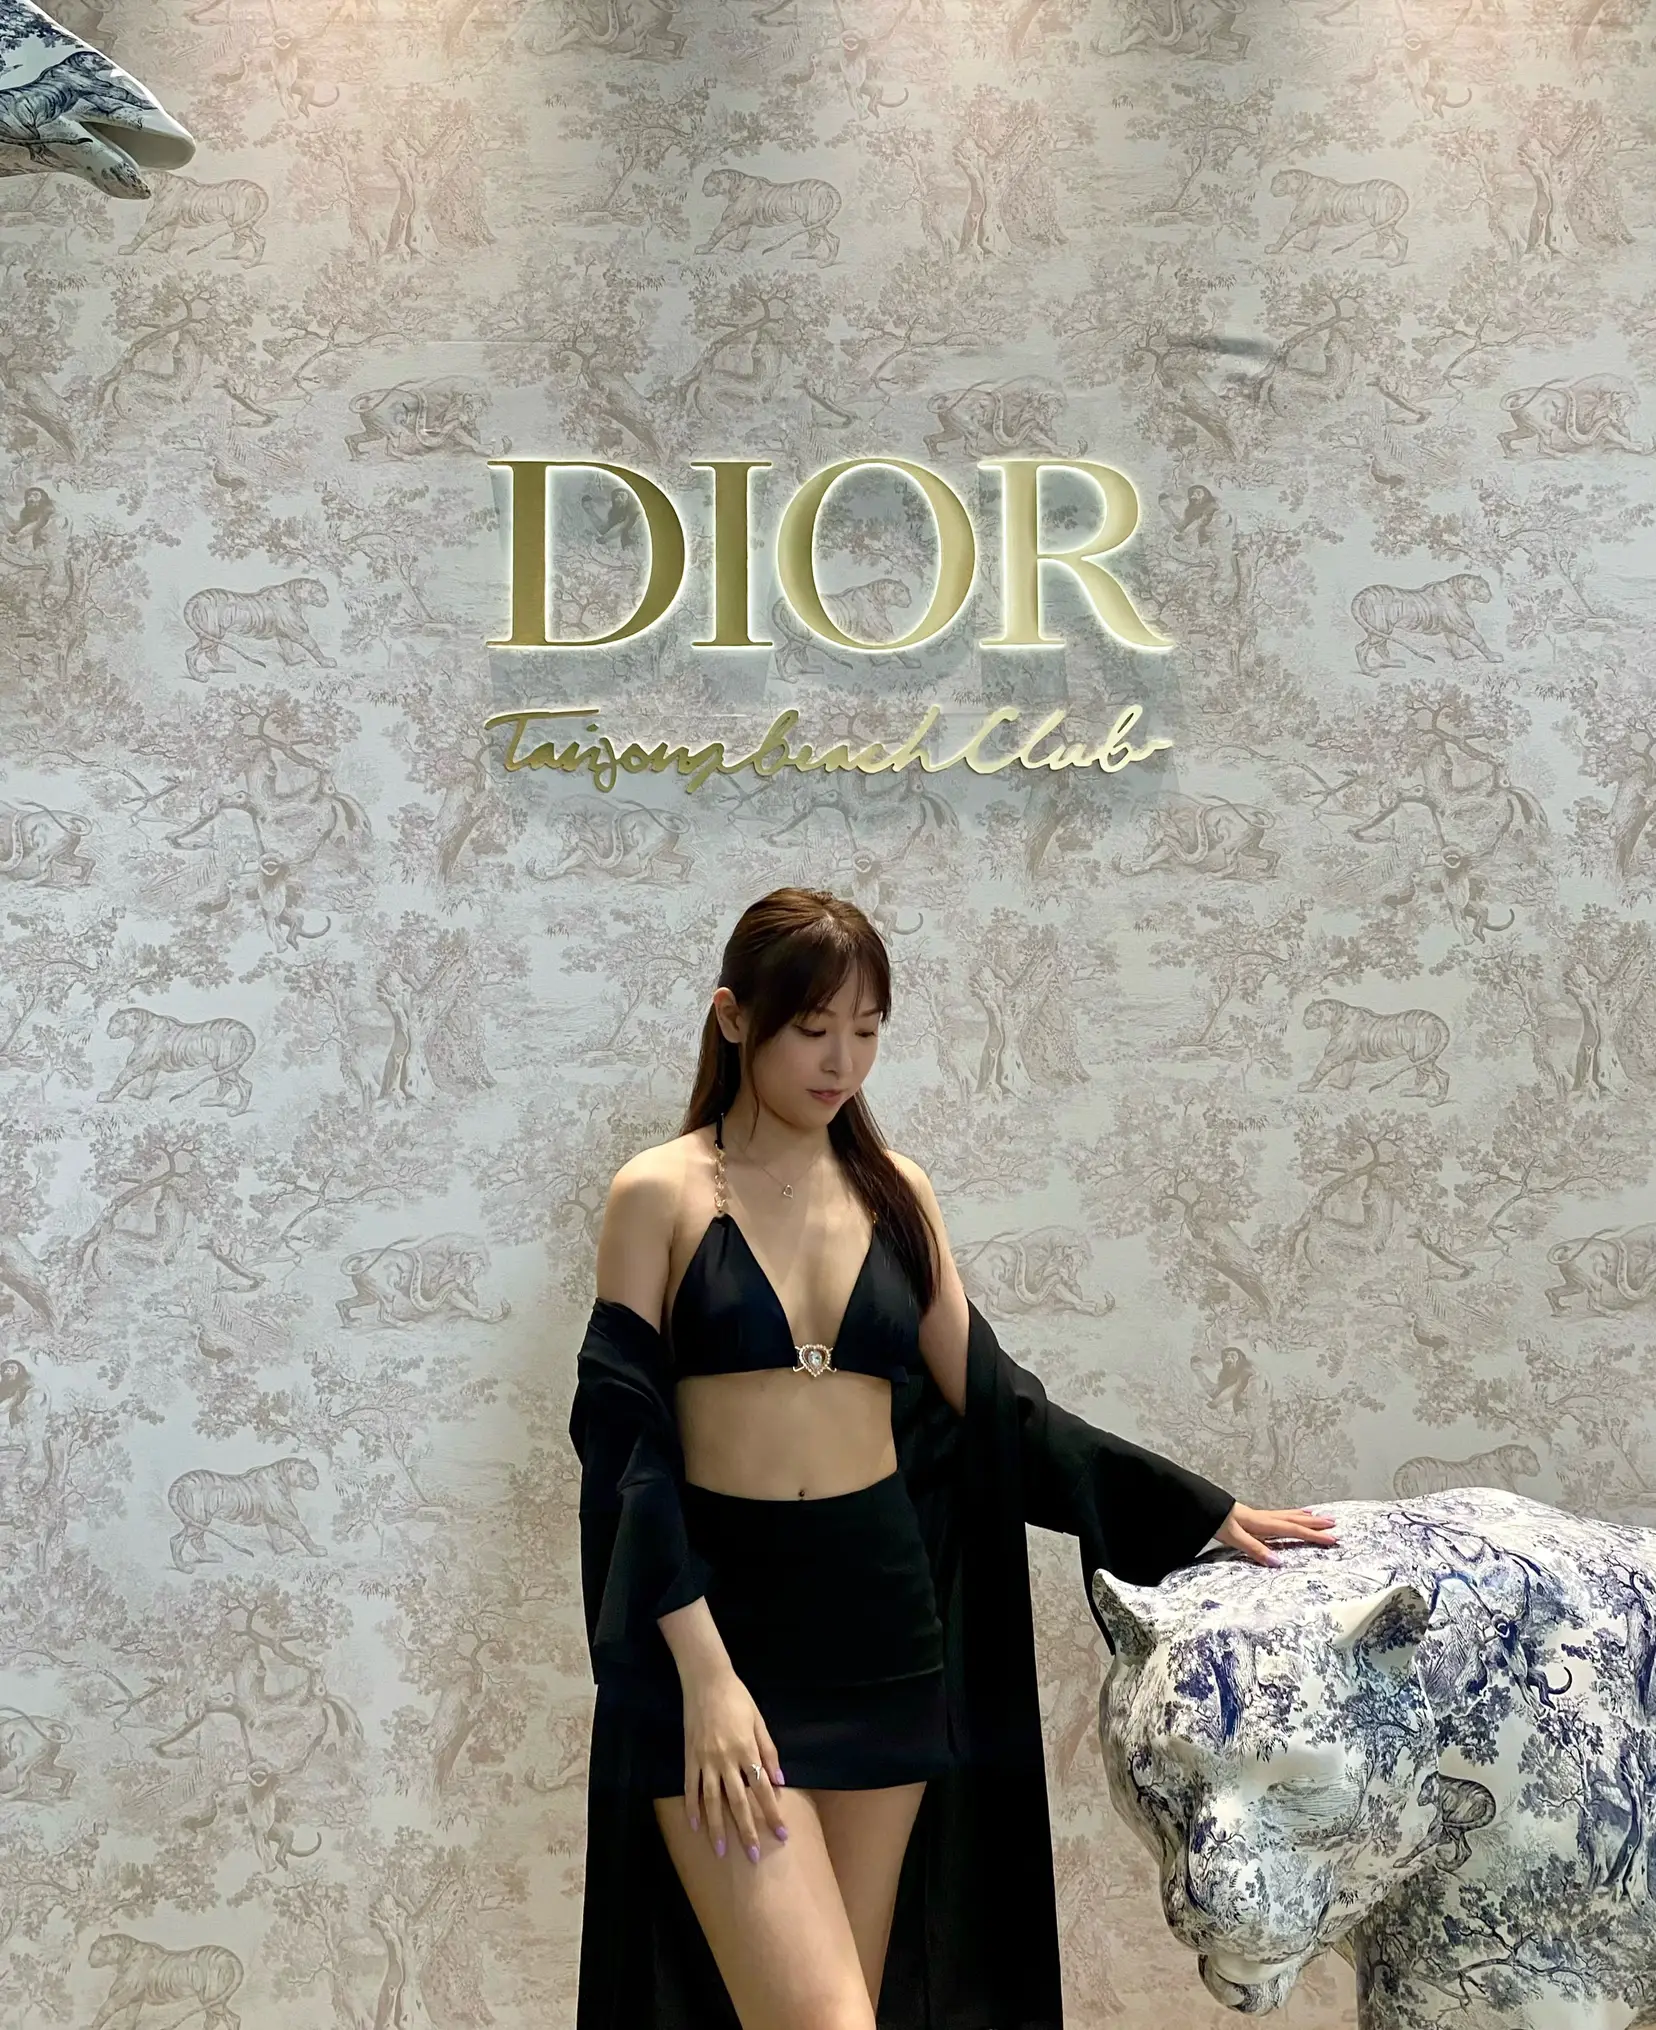 Cha Eun Woo at Dior's After-Party. Let's Clear this Up. 